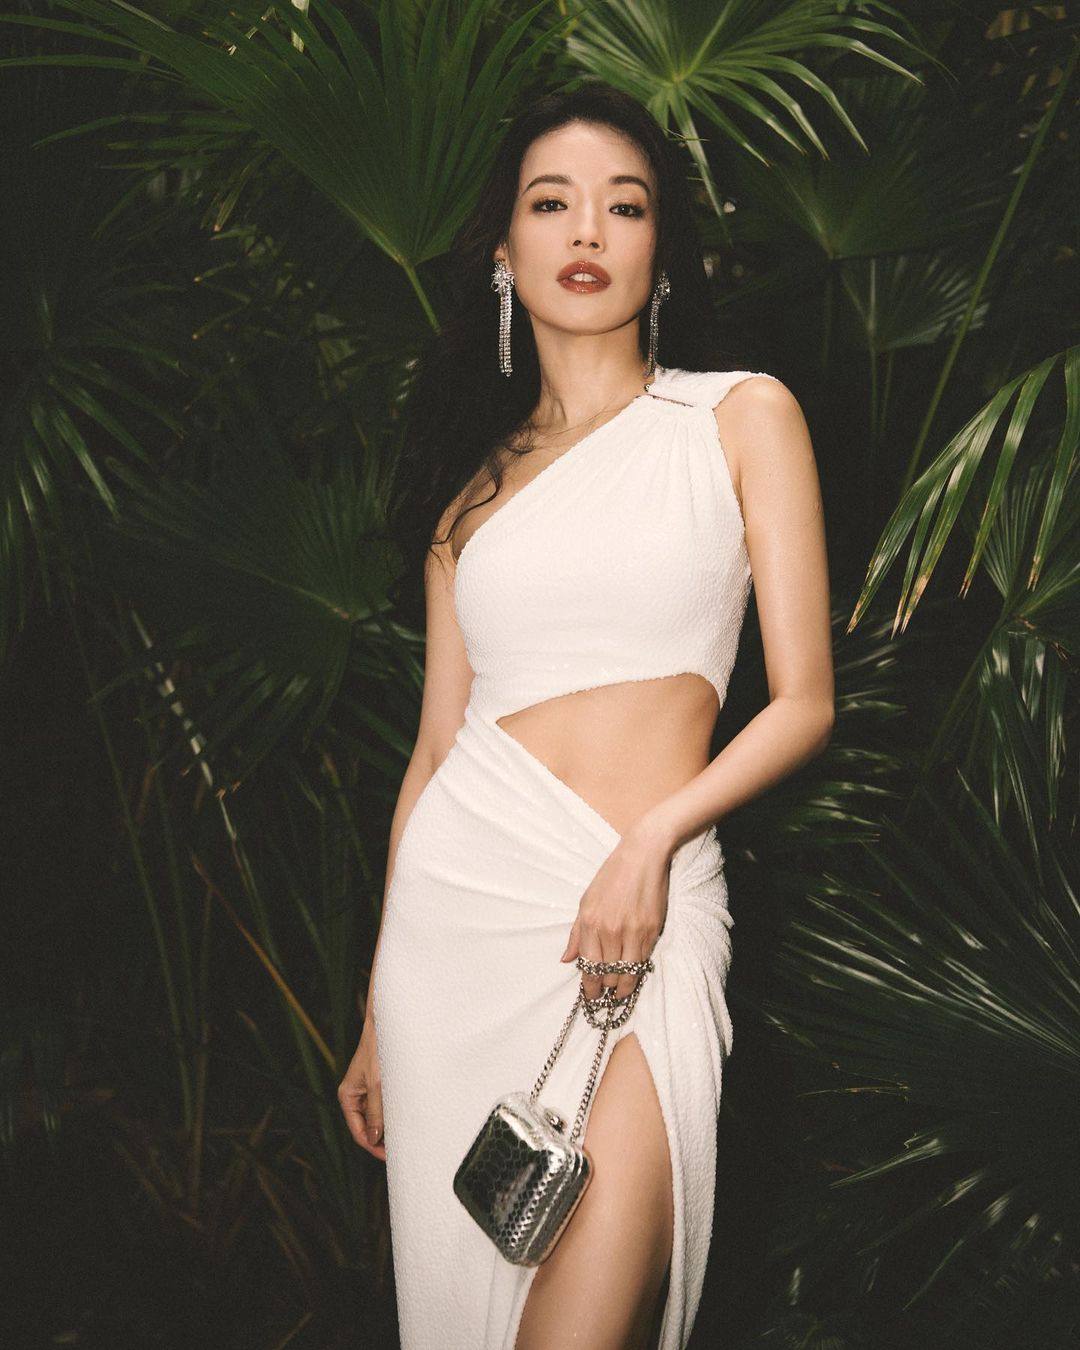 6 of Shu Qi's biggest luxury brand endorsements over the years 